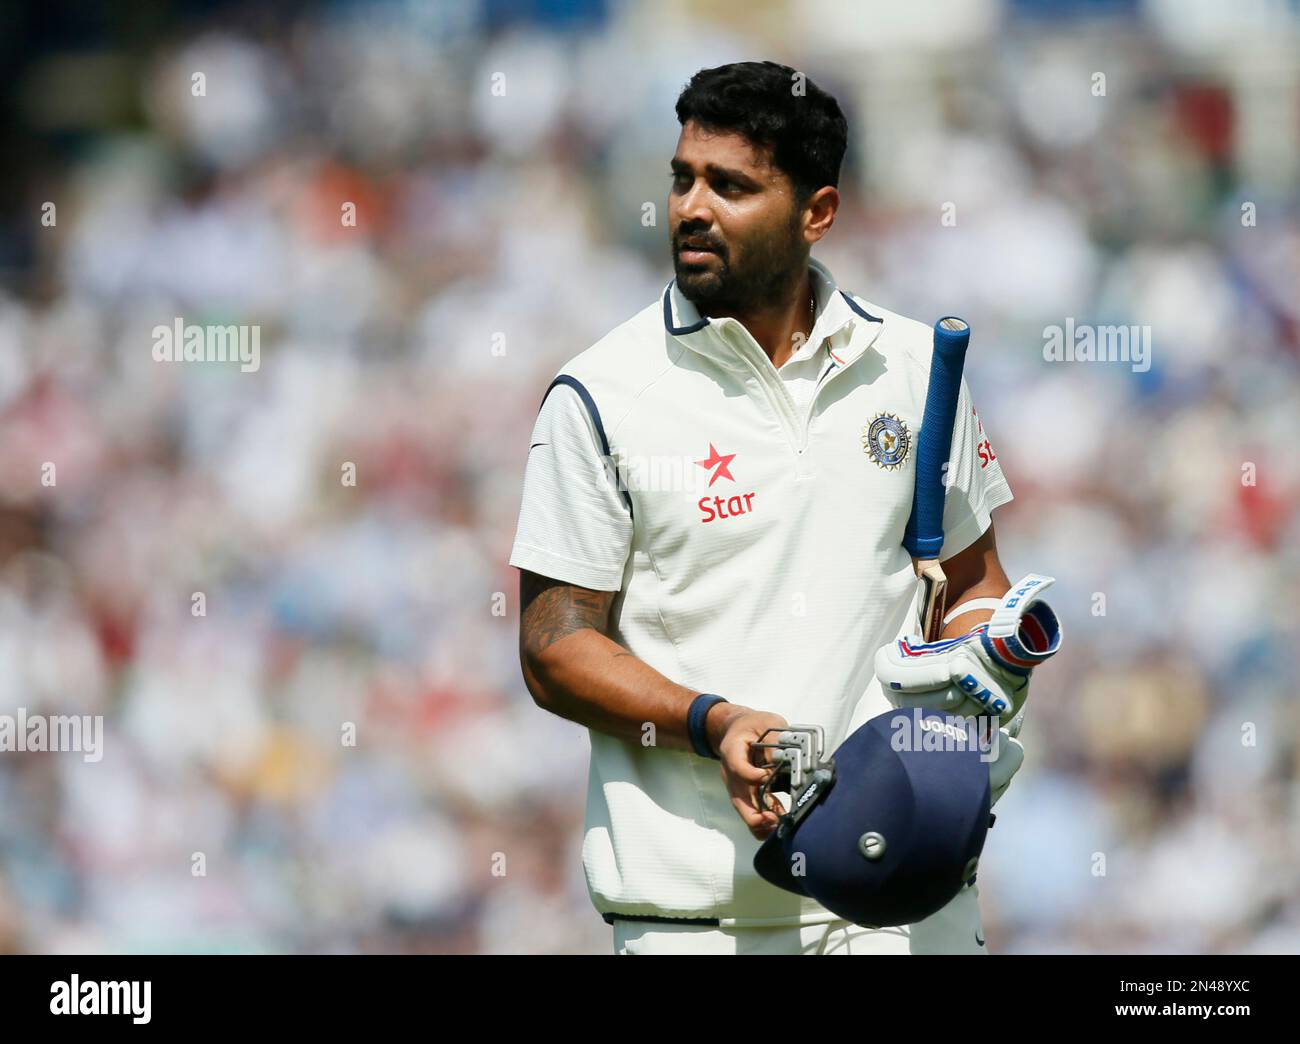 Indias Murali Vijay looks at a large video screen to see how he lost his wicket, caught out by Englands Joe Root off the bowling of Chris Woakes, during the first day